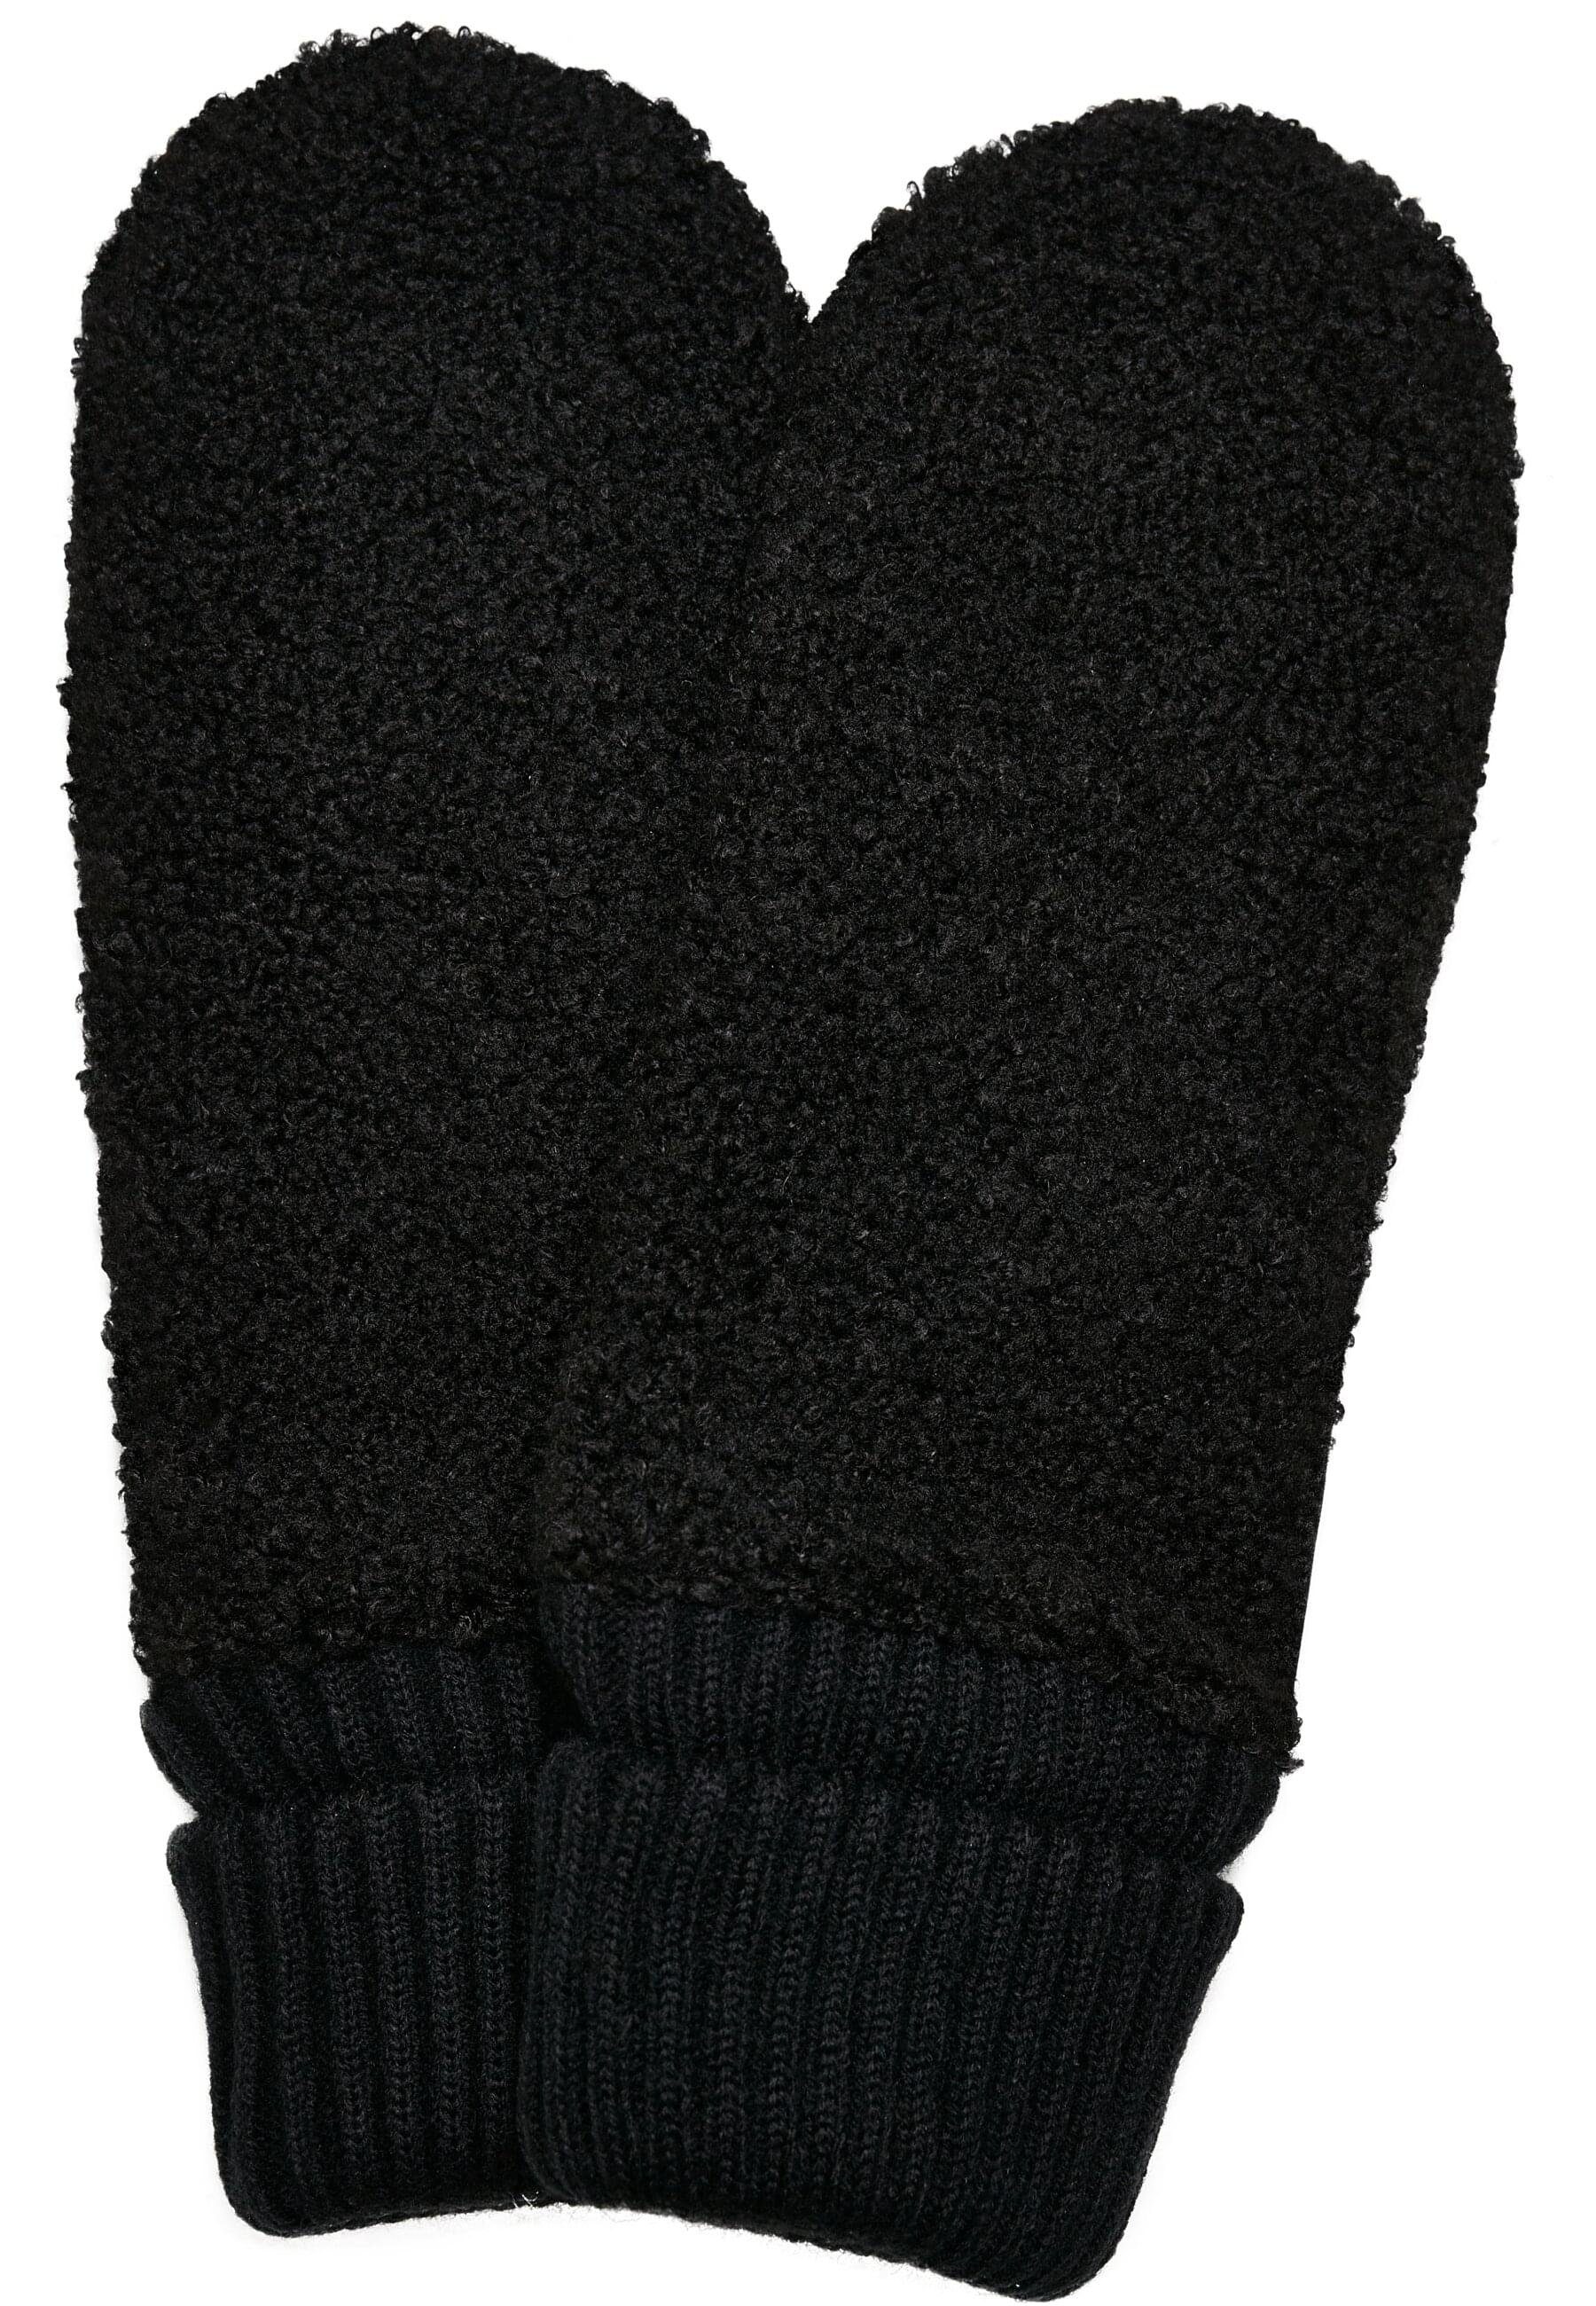 URBAN Sherpa Synthetic Baumwollhandschuhe Unisex Leather Gloves CLASSICS